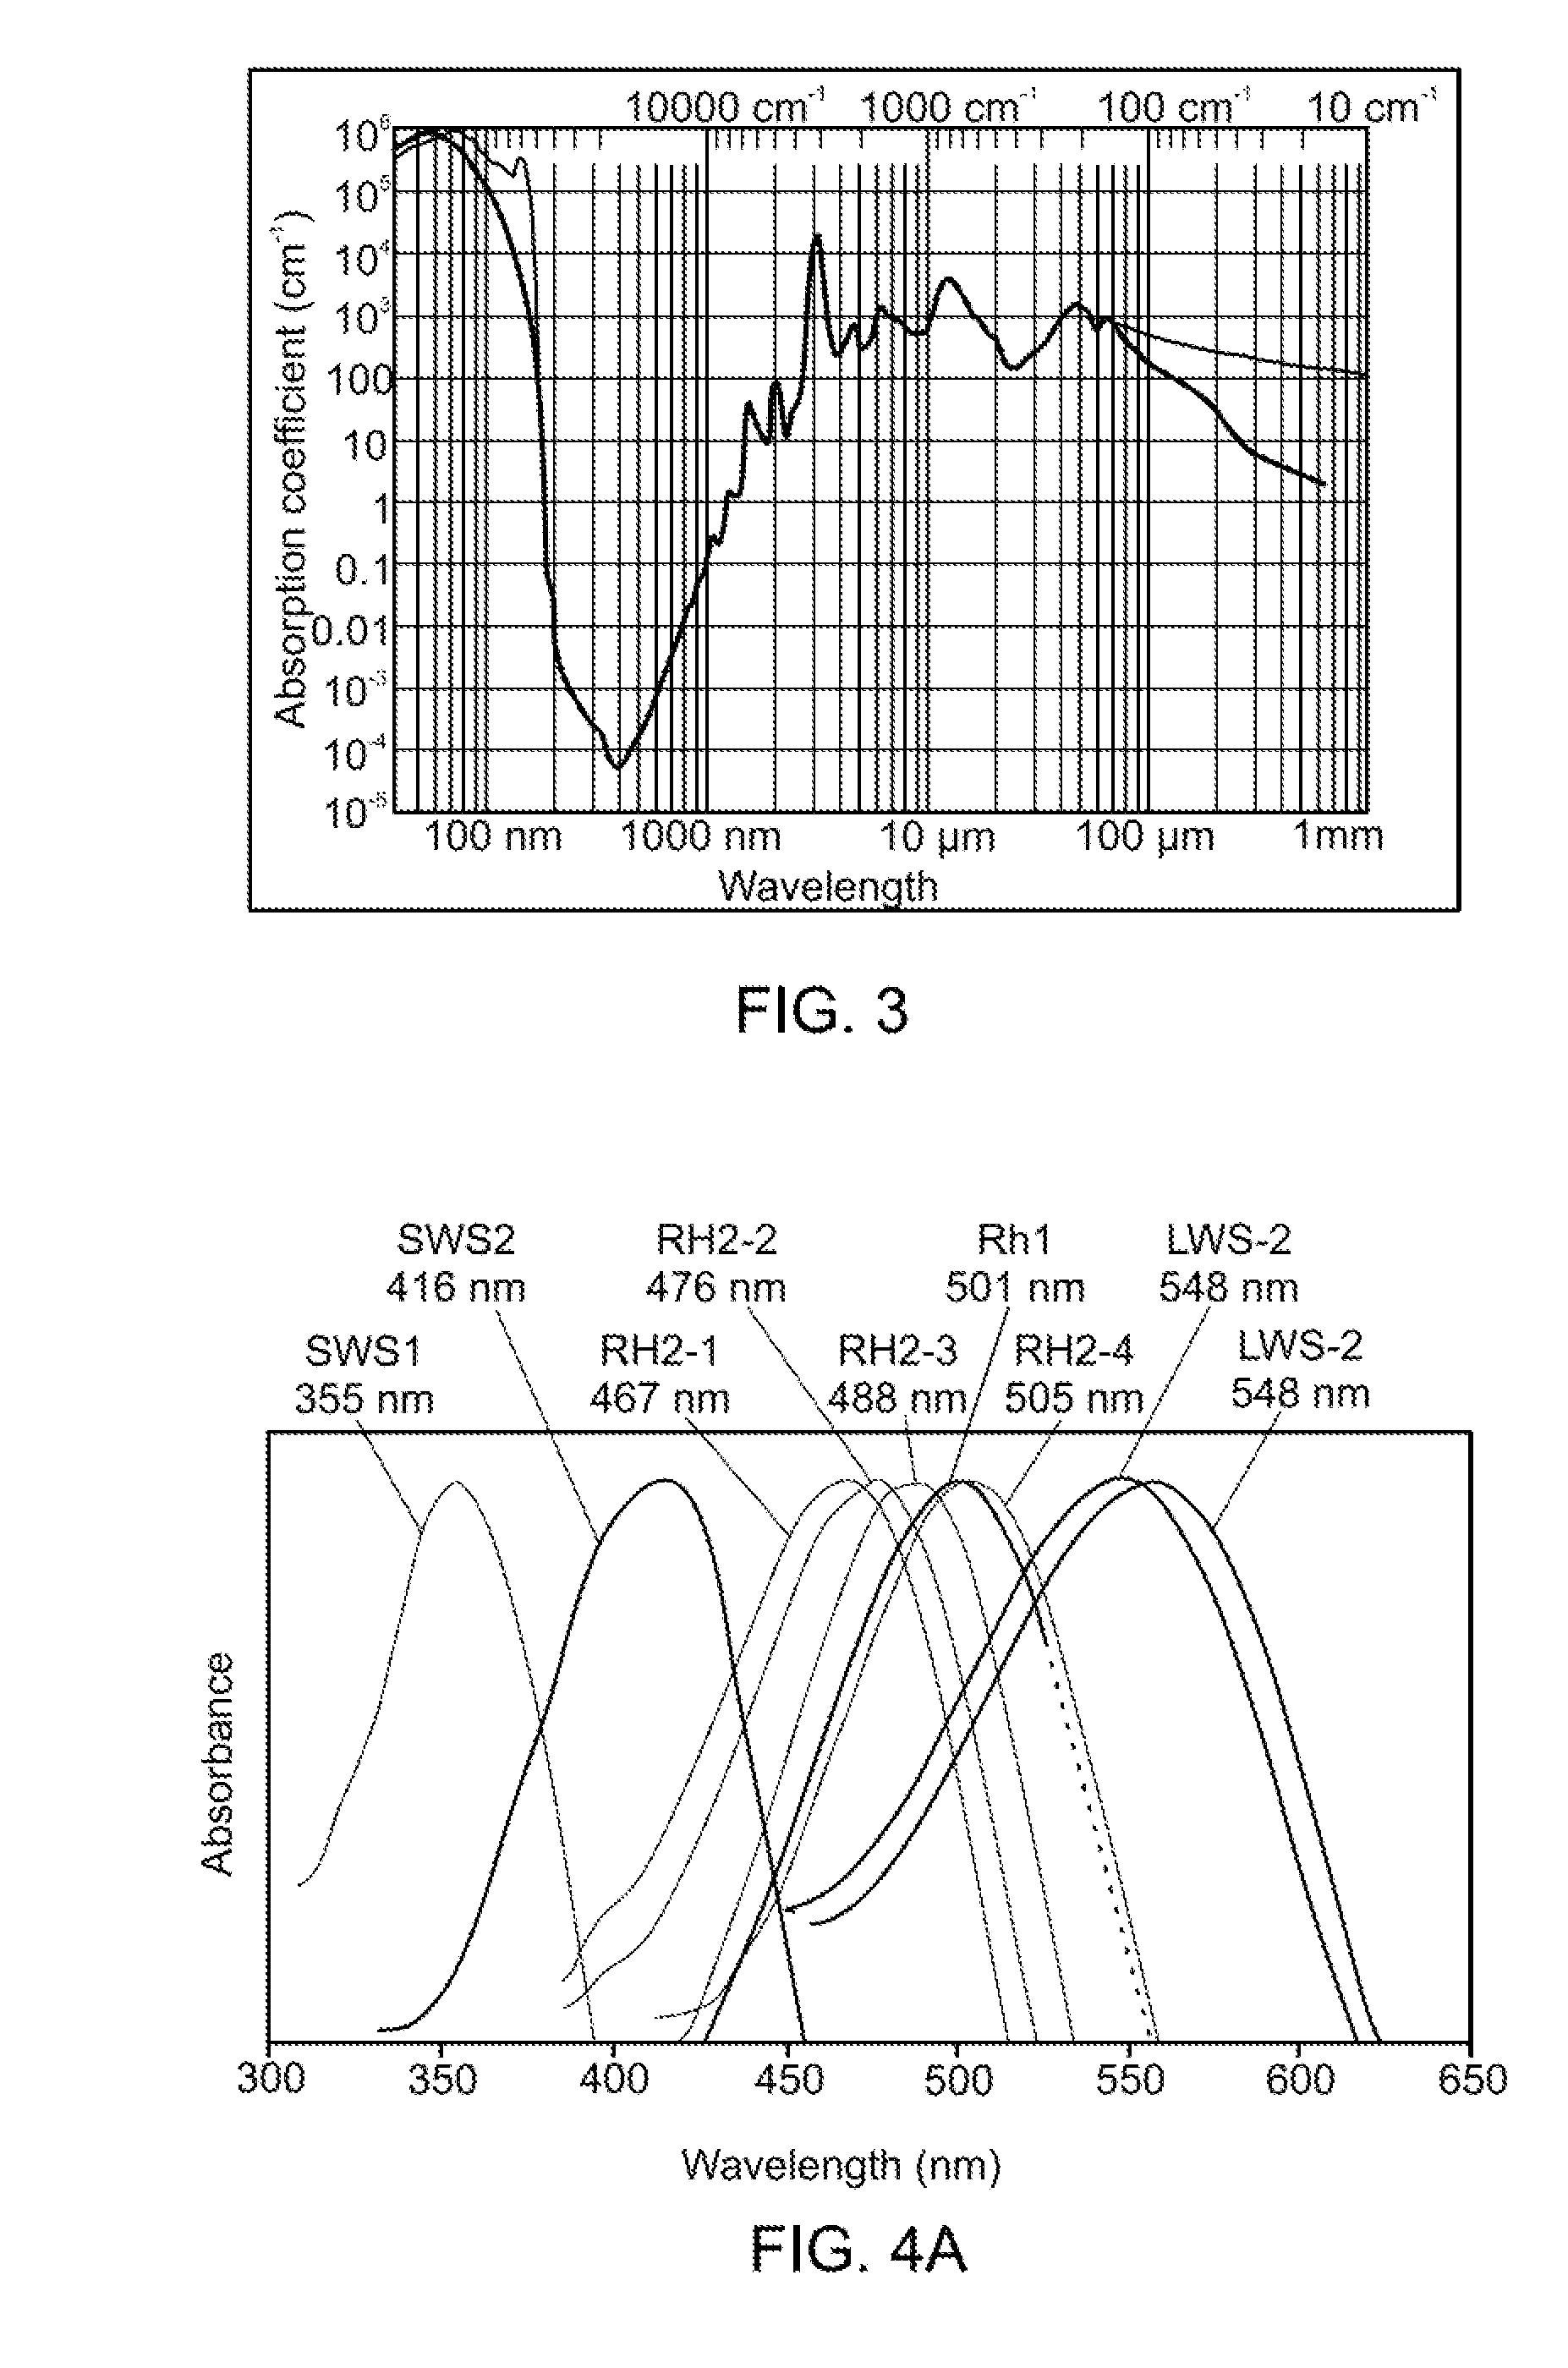 Method and system for provoking an avoidance behavioral response in animals